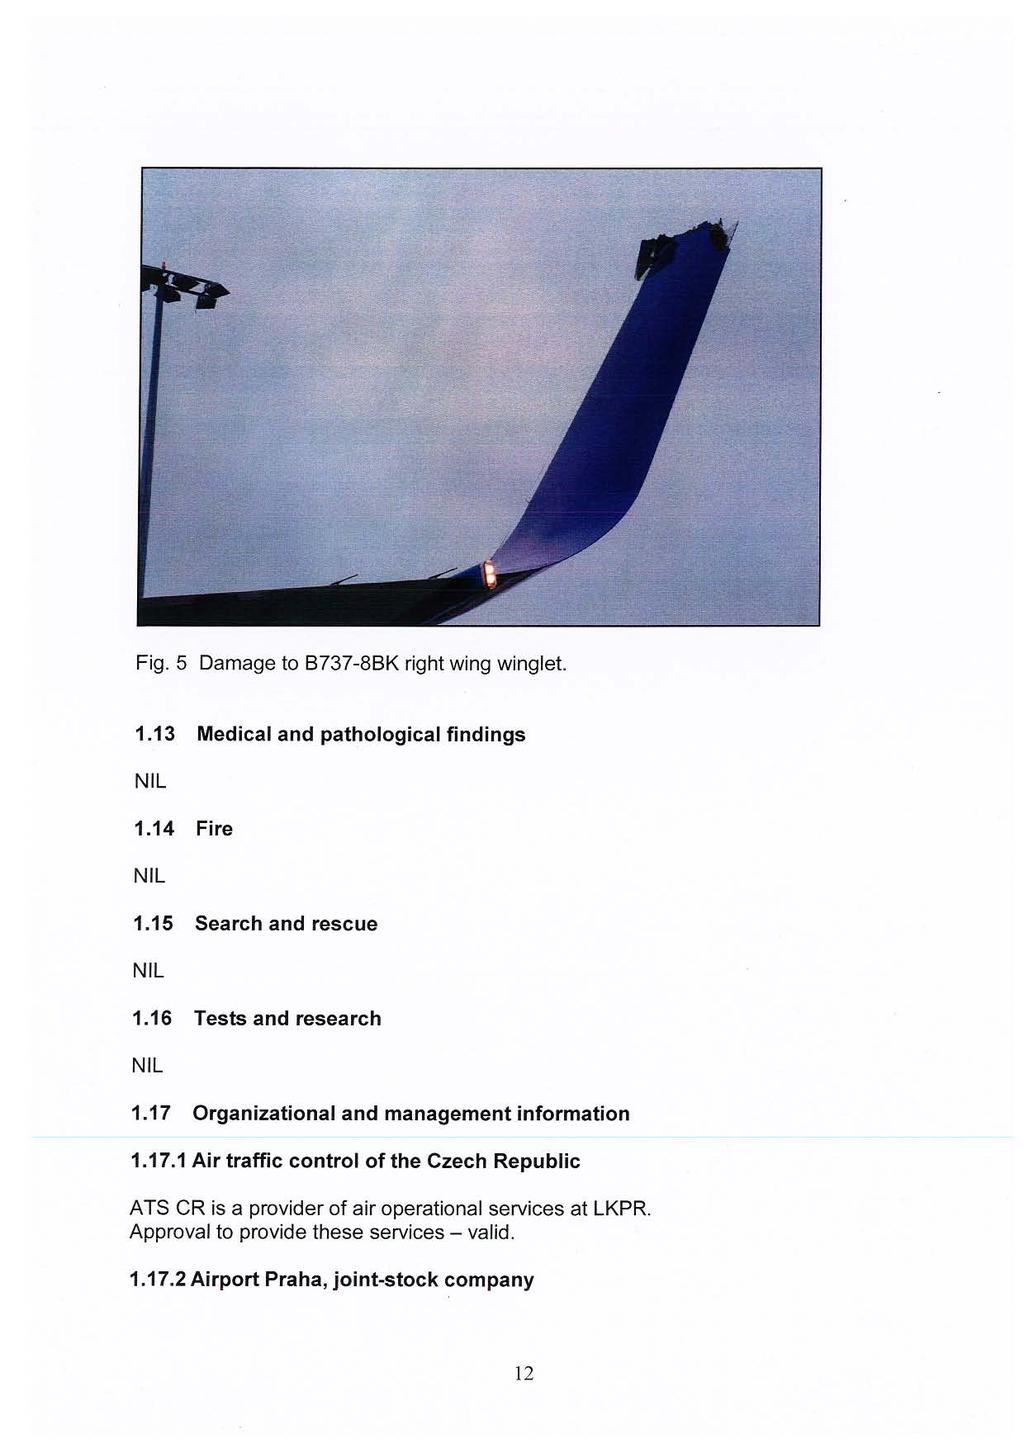 Fig. 5 Damage to B737-8BK right wing winglet. 1.13 Medical and pathological findings NIL 1.14 Fire NIL 1.15 Search and rescue NIL 1.16 Tests and research NIL 1.